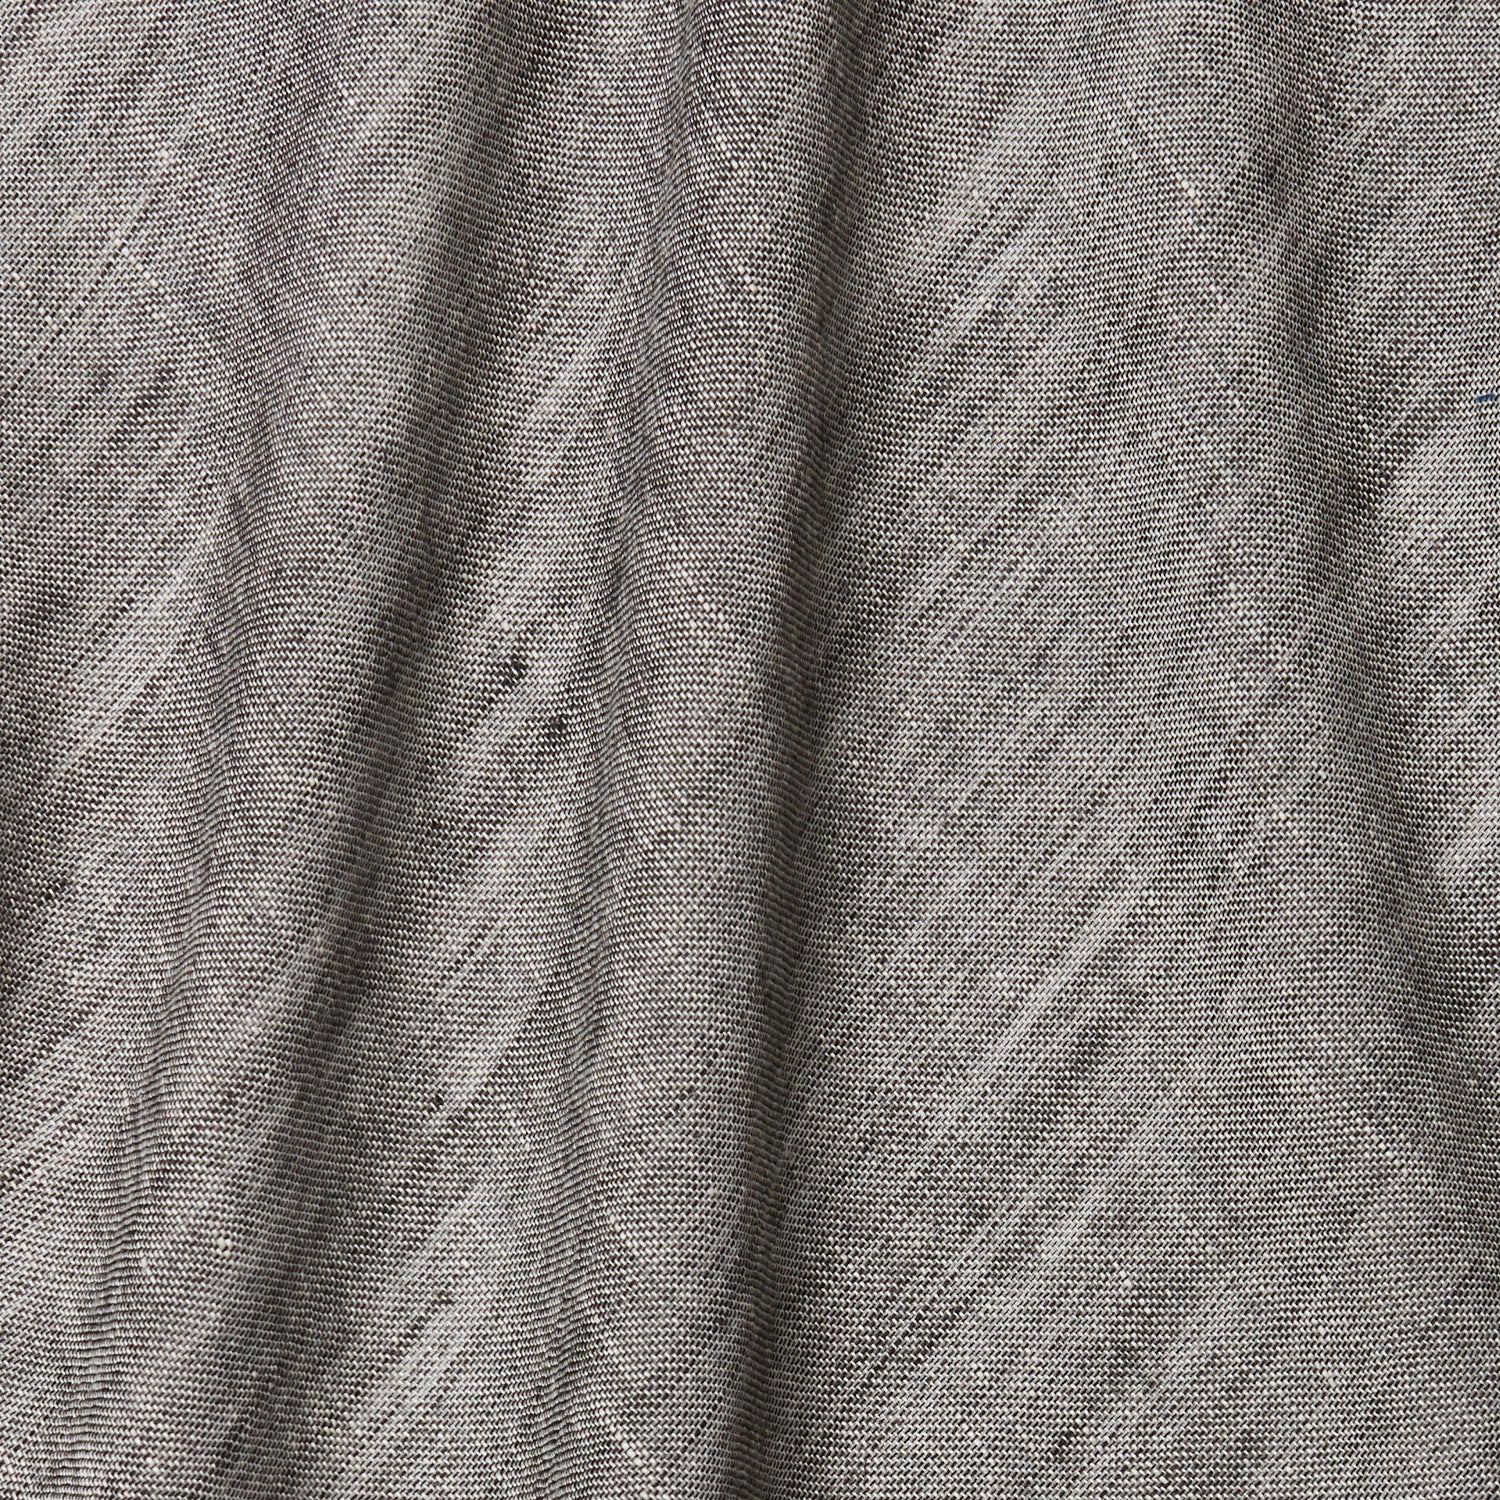 A draped swatch of open-weave sheer interior fabric in a mottled gray color.